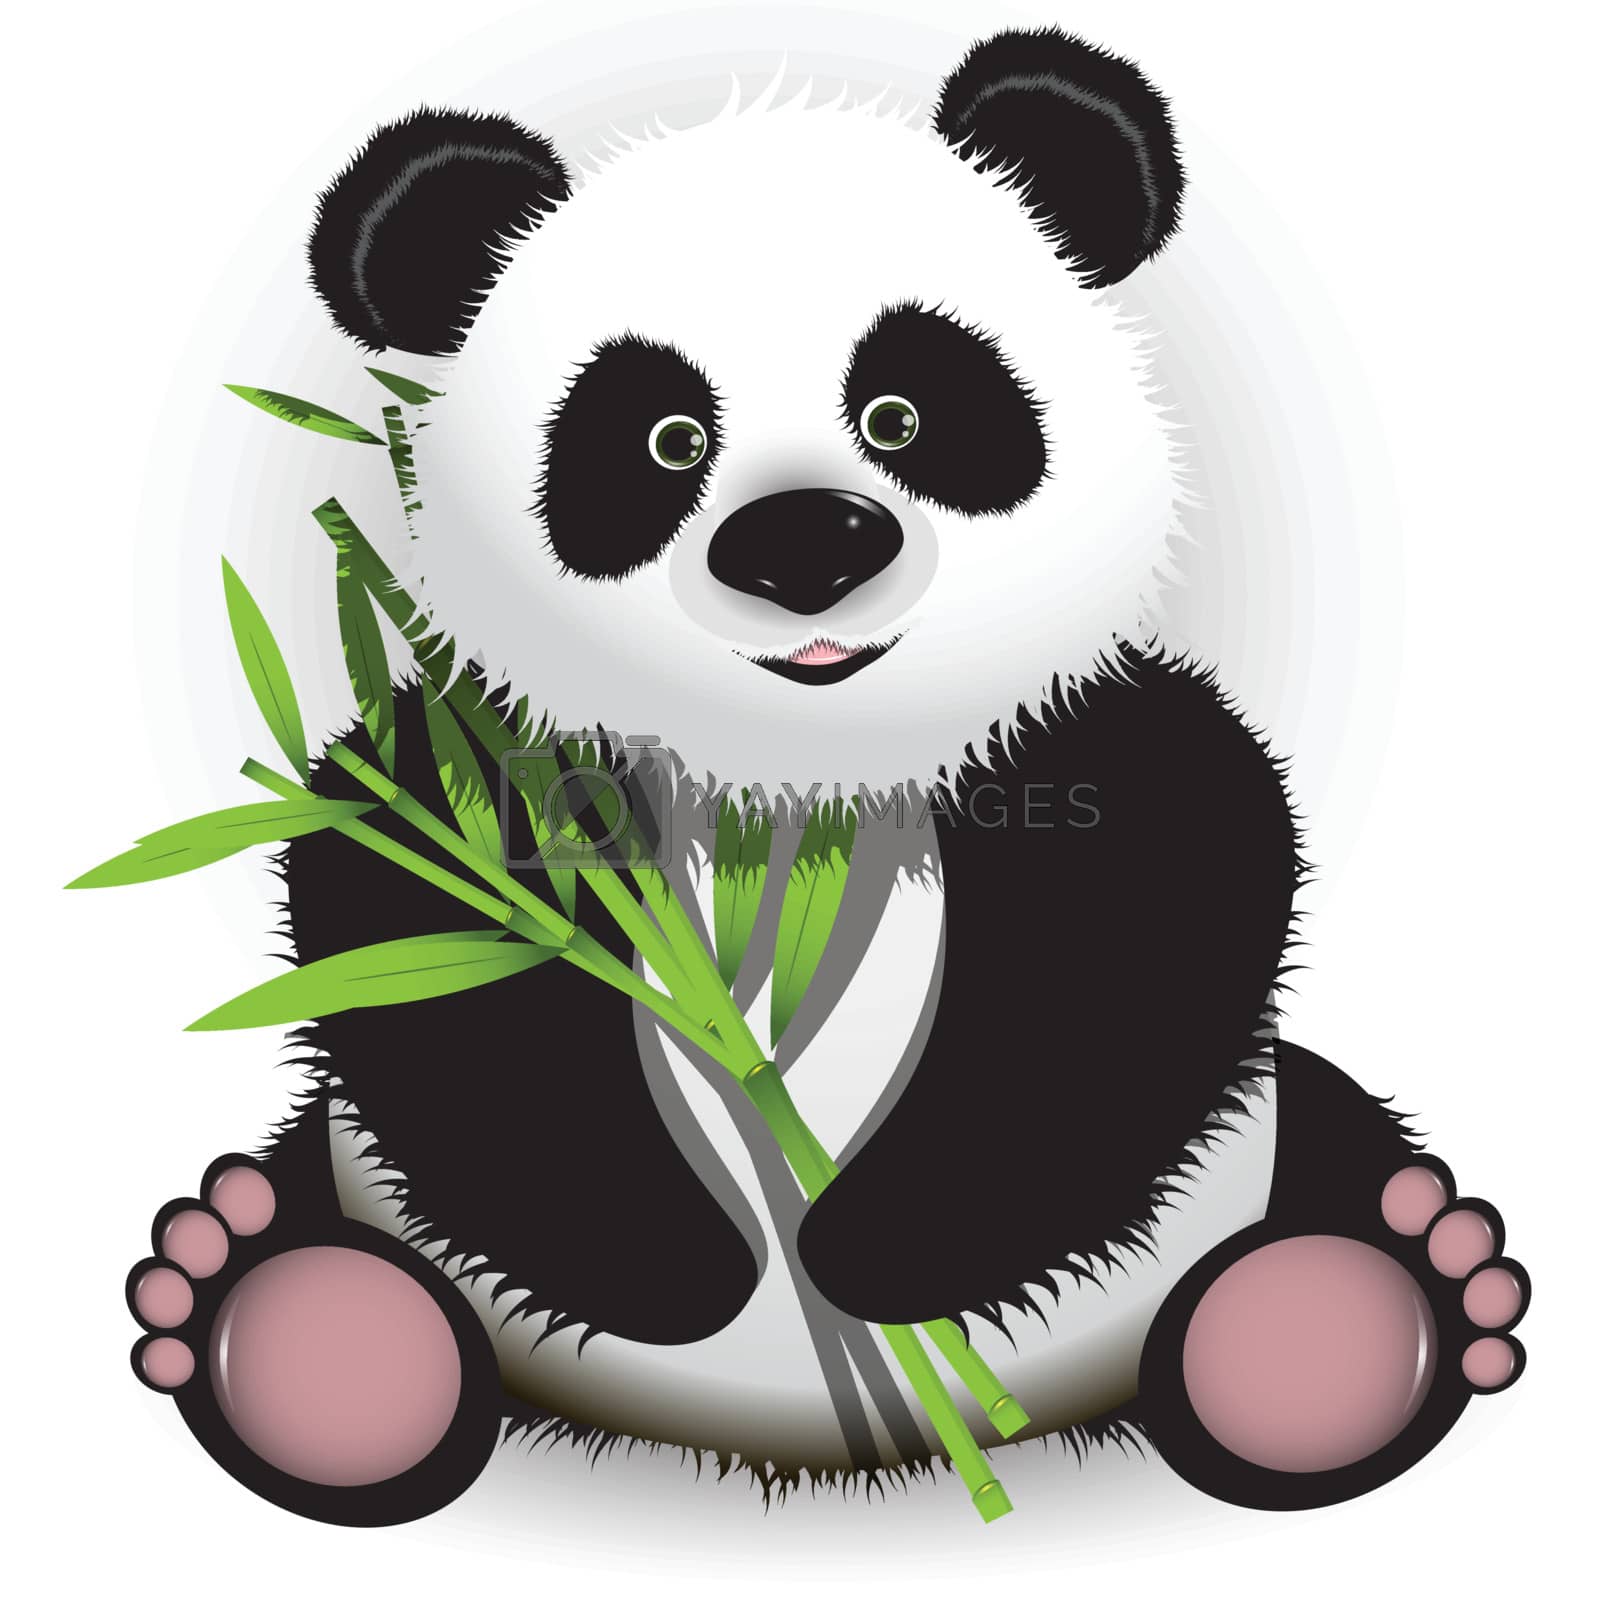 Royalty free image of Panda by brux